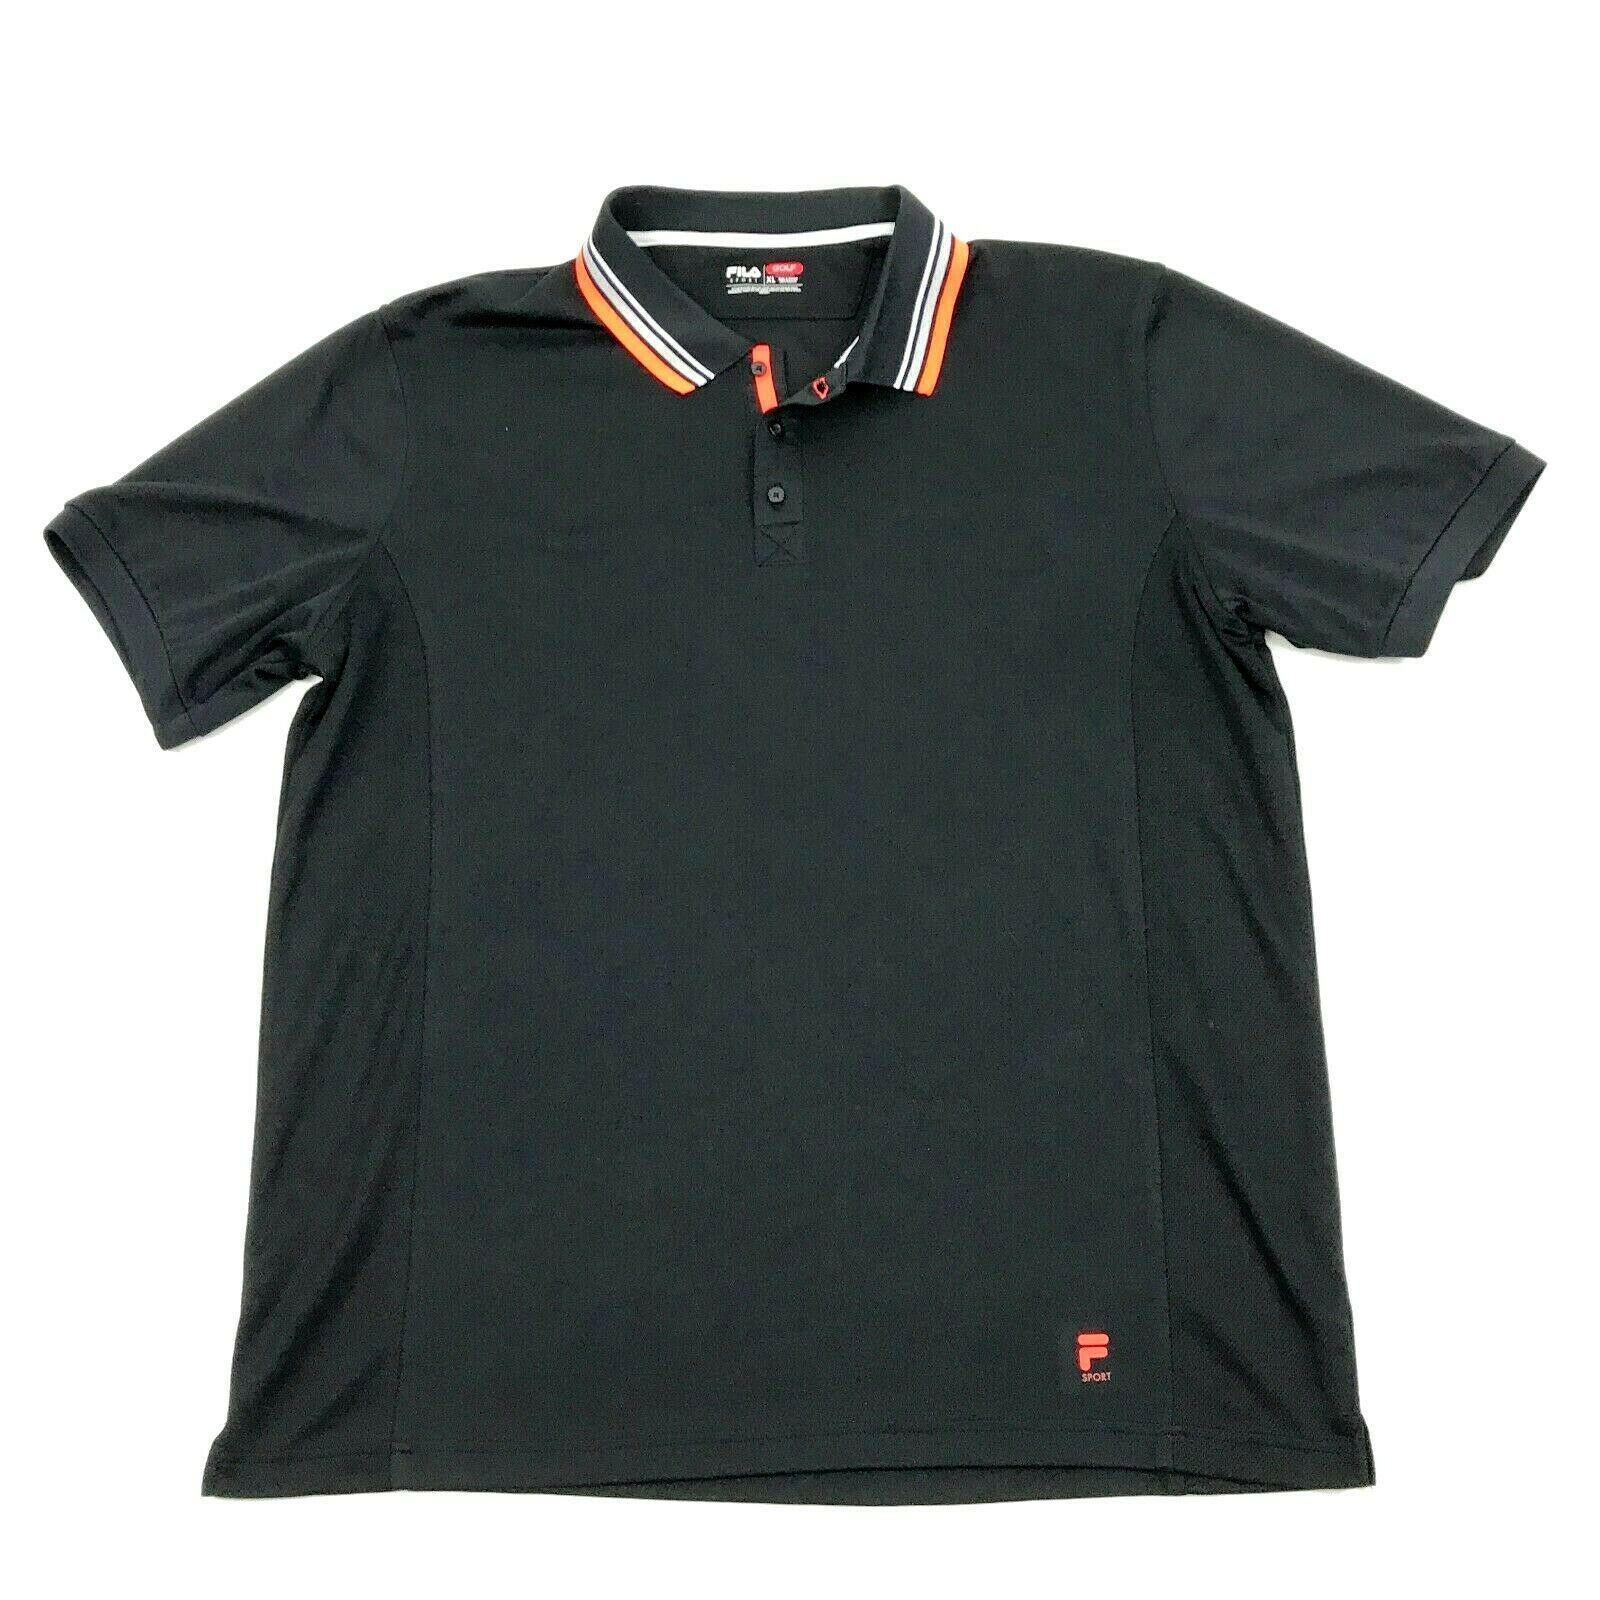 FILA GOLF Mens Black Polo Relaxed Fit Size XL Extra Large Neon Orange ...